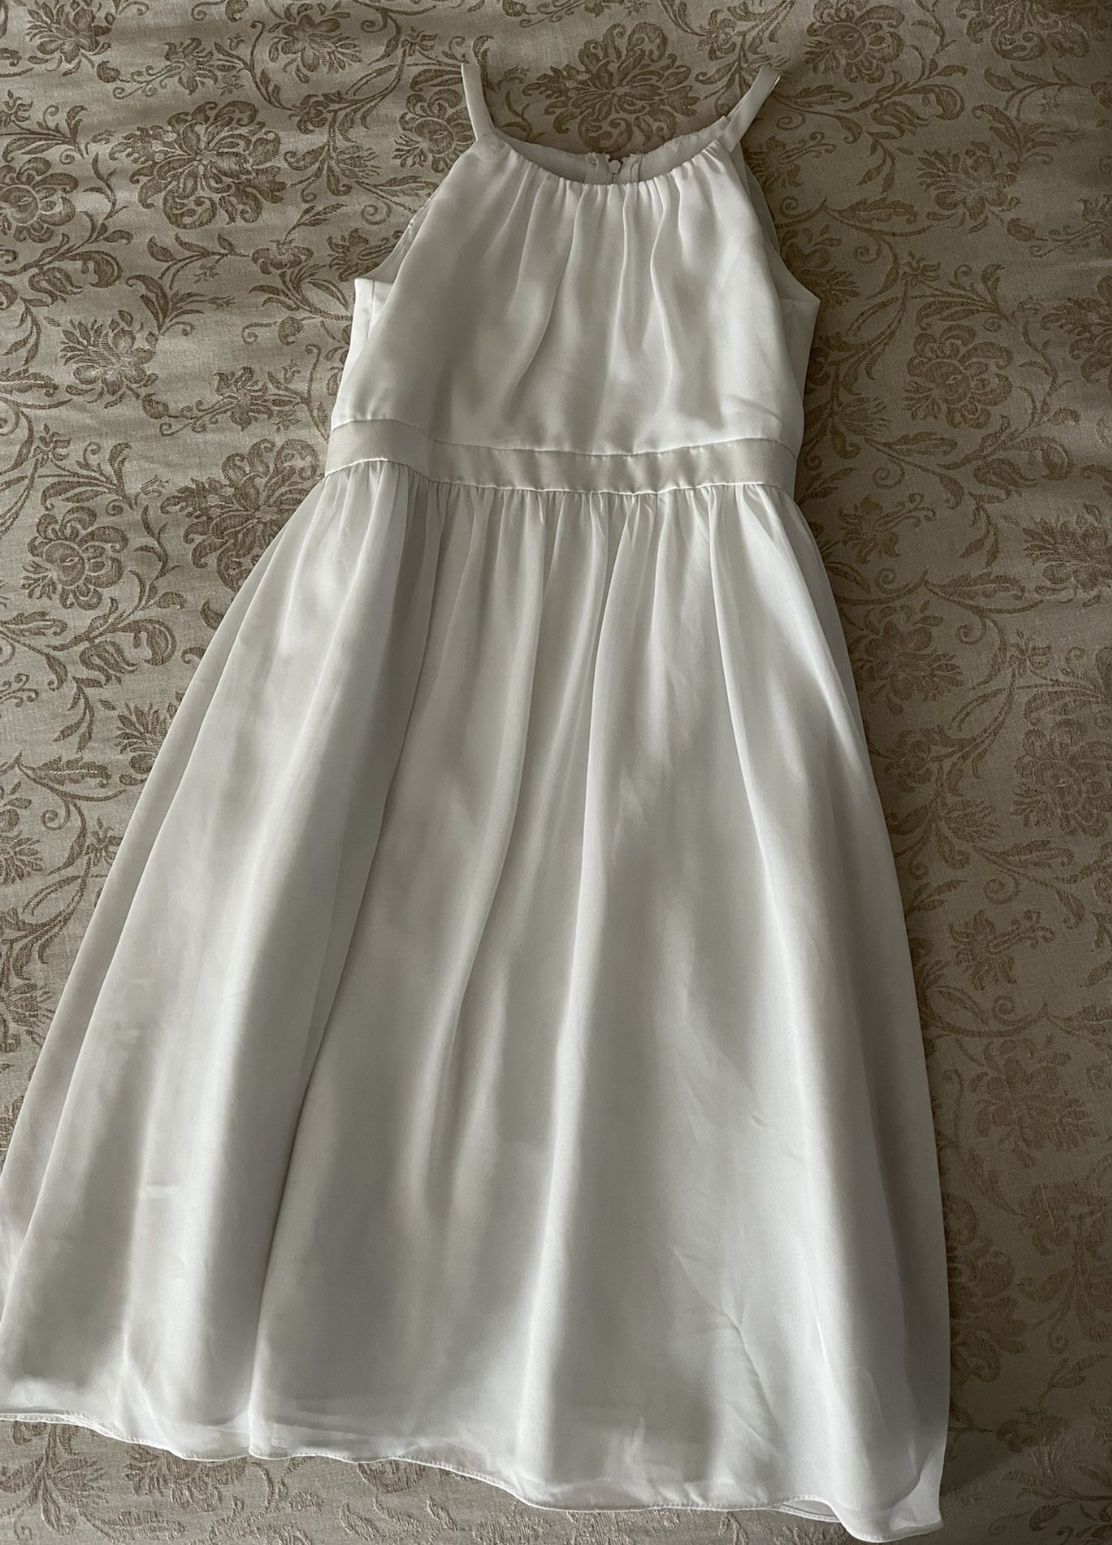 DAVID’S BRIDAL GIRLS SIZE 10 WHITE FIRST COMMUNION DRESS / BRIDESMAID / FLOWER GIRL / PAGEANT - BEAUTIFUL CONDITION!